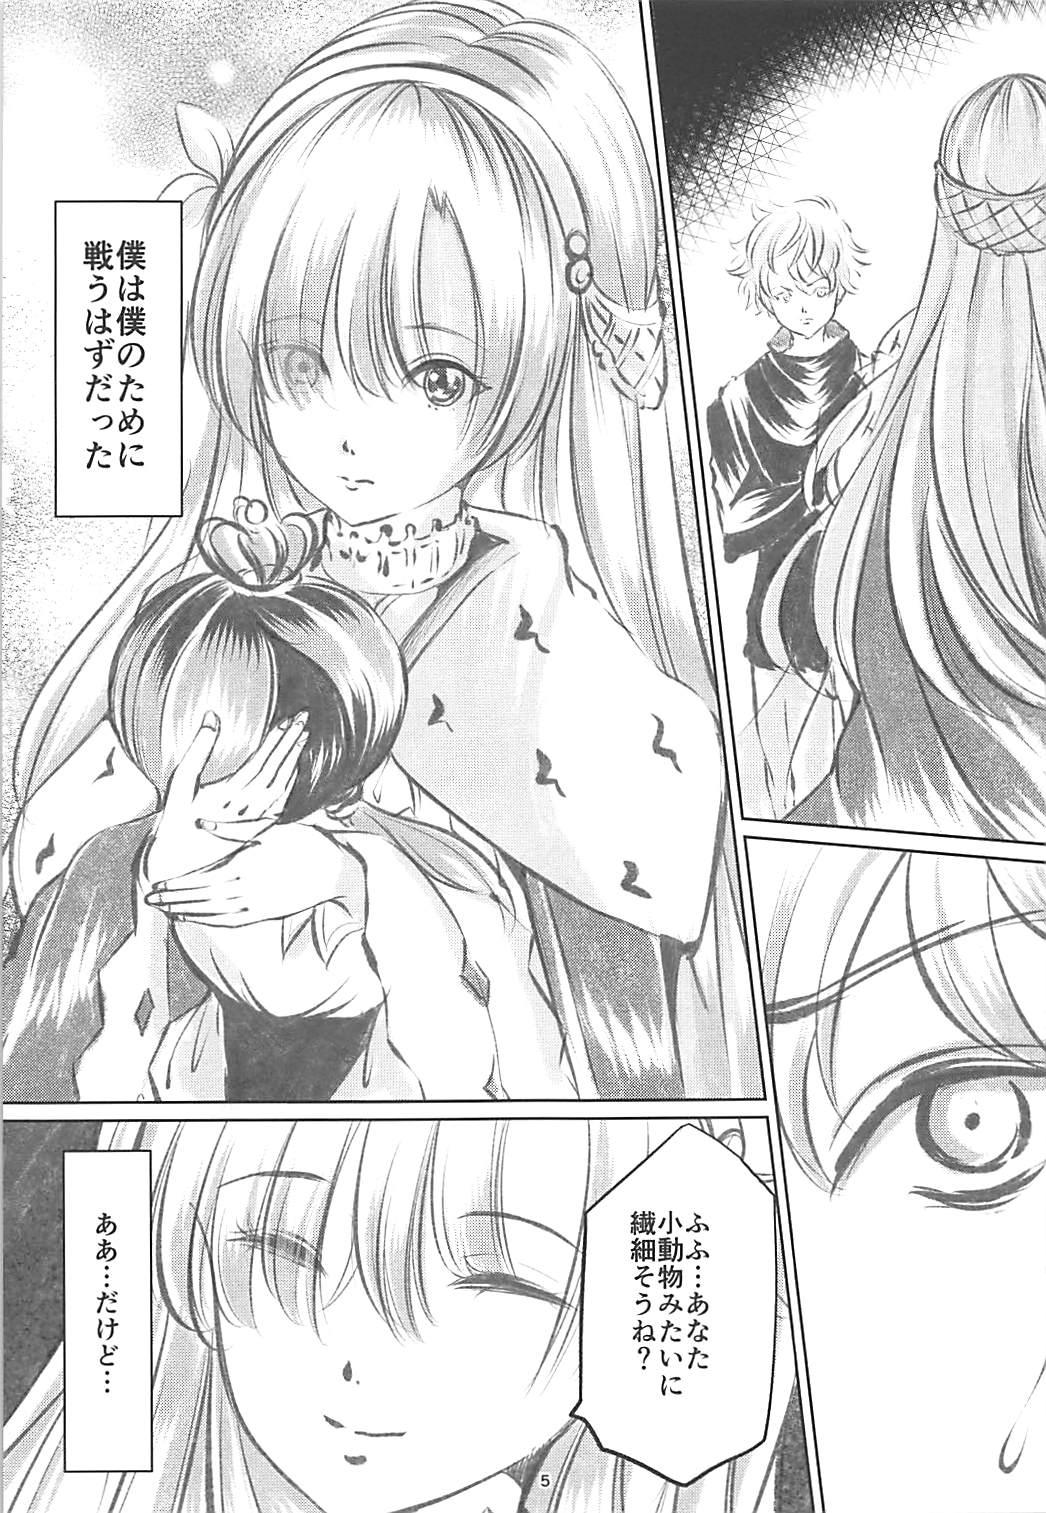 Interview Anastasia no Yume - Fate grand order 4some - Page 4